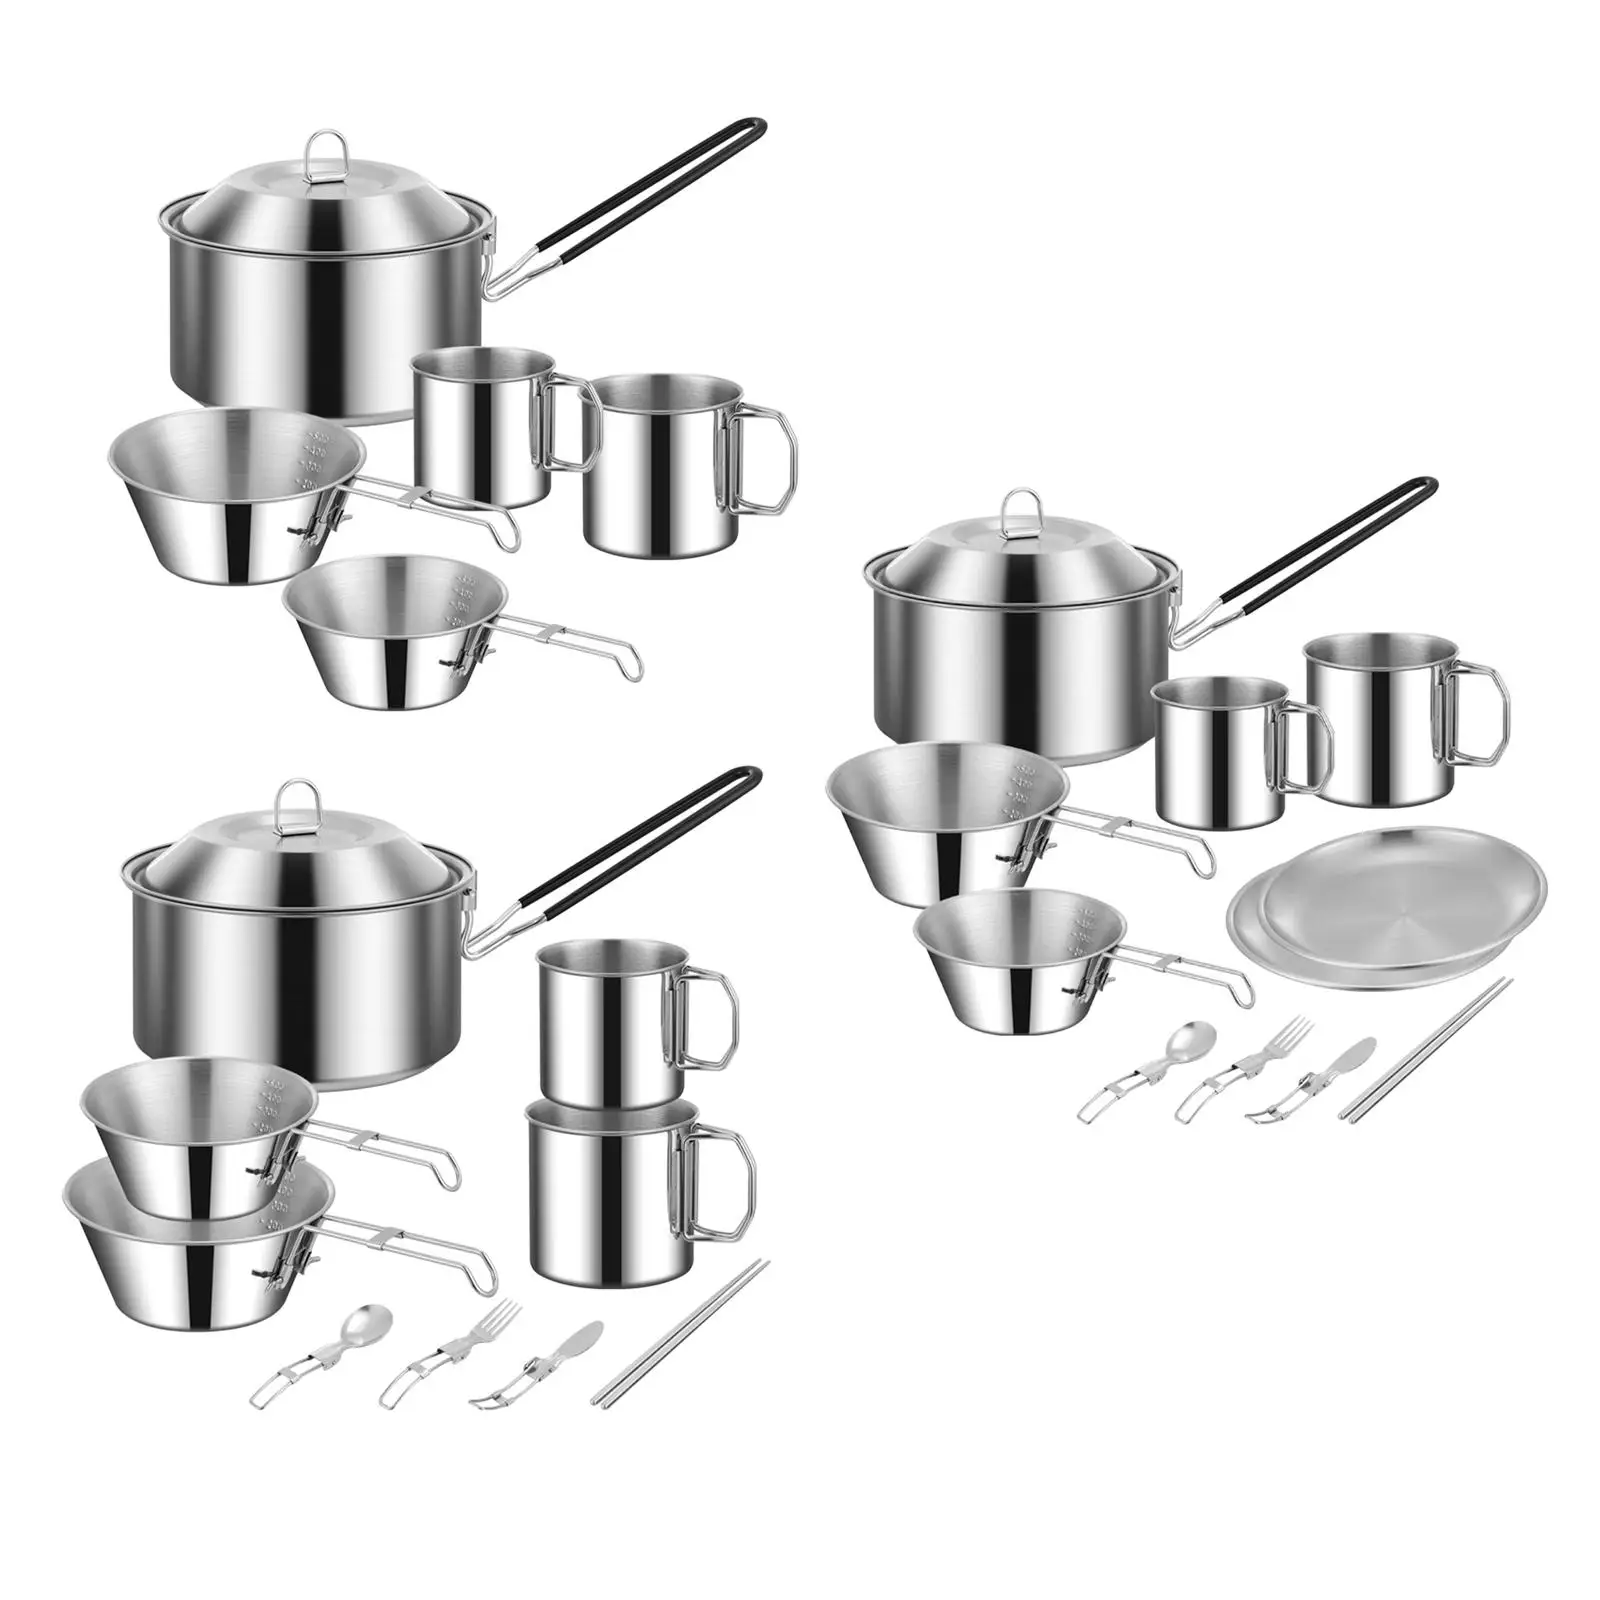 Cooking Pot set Camping Portable Household Tableware Accessories for Picnic